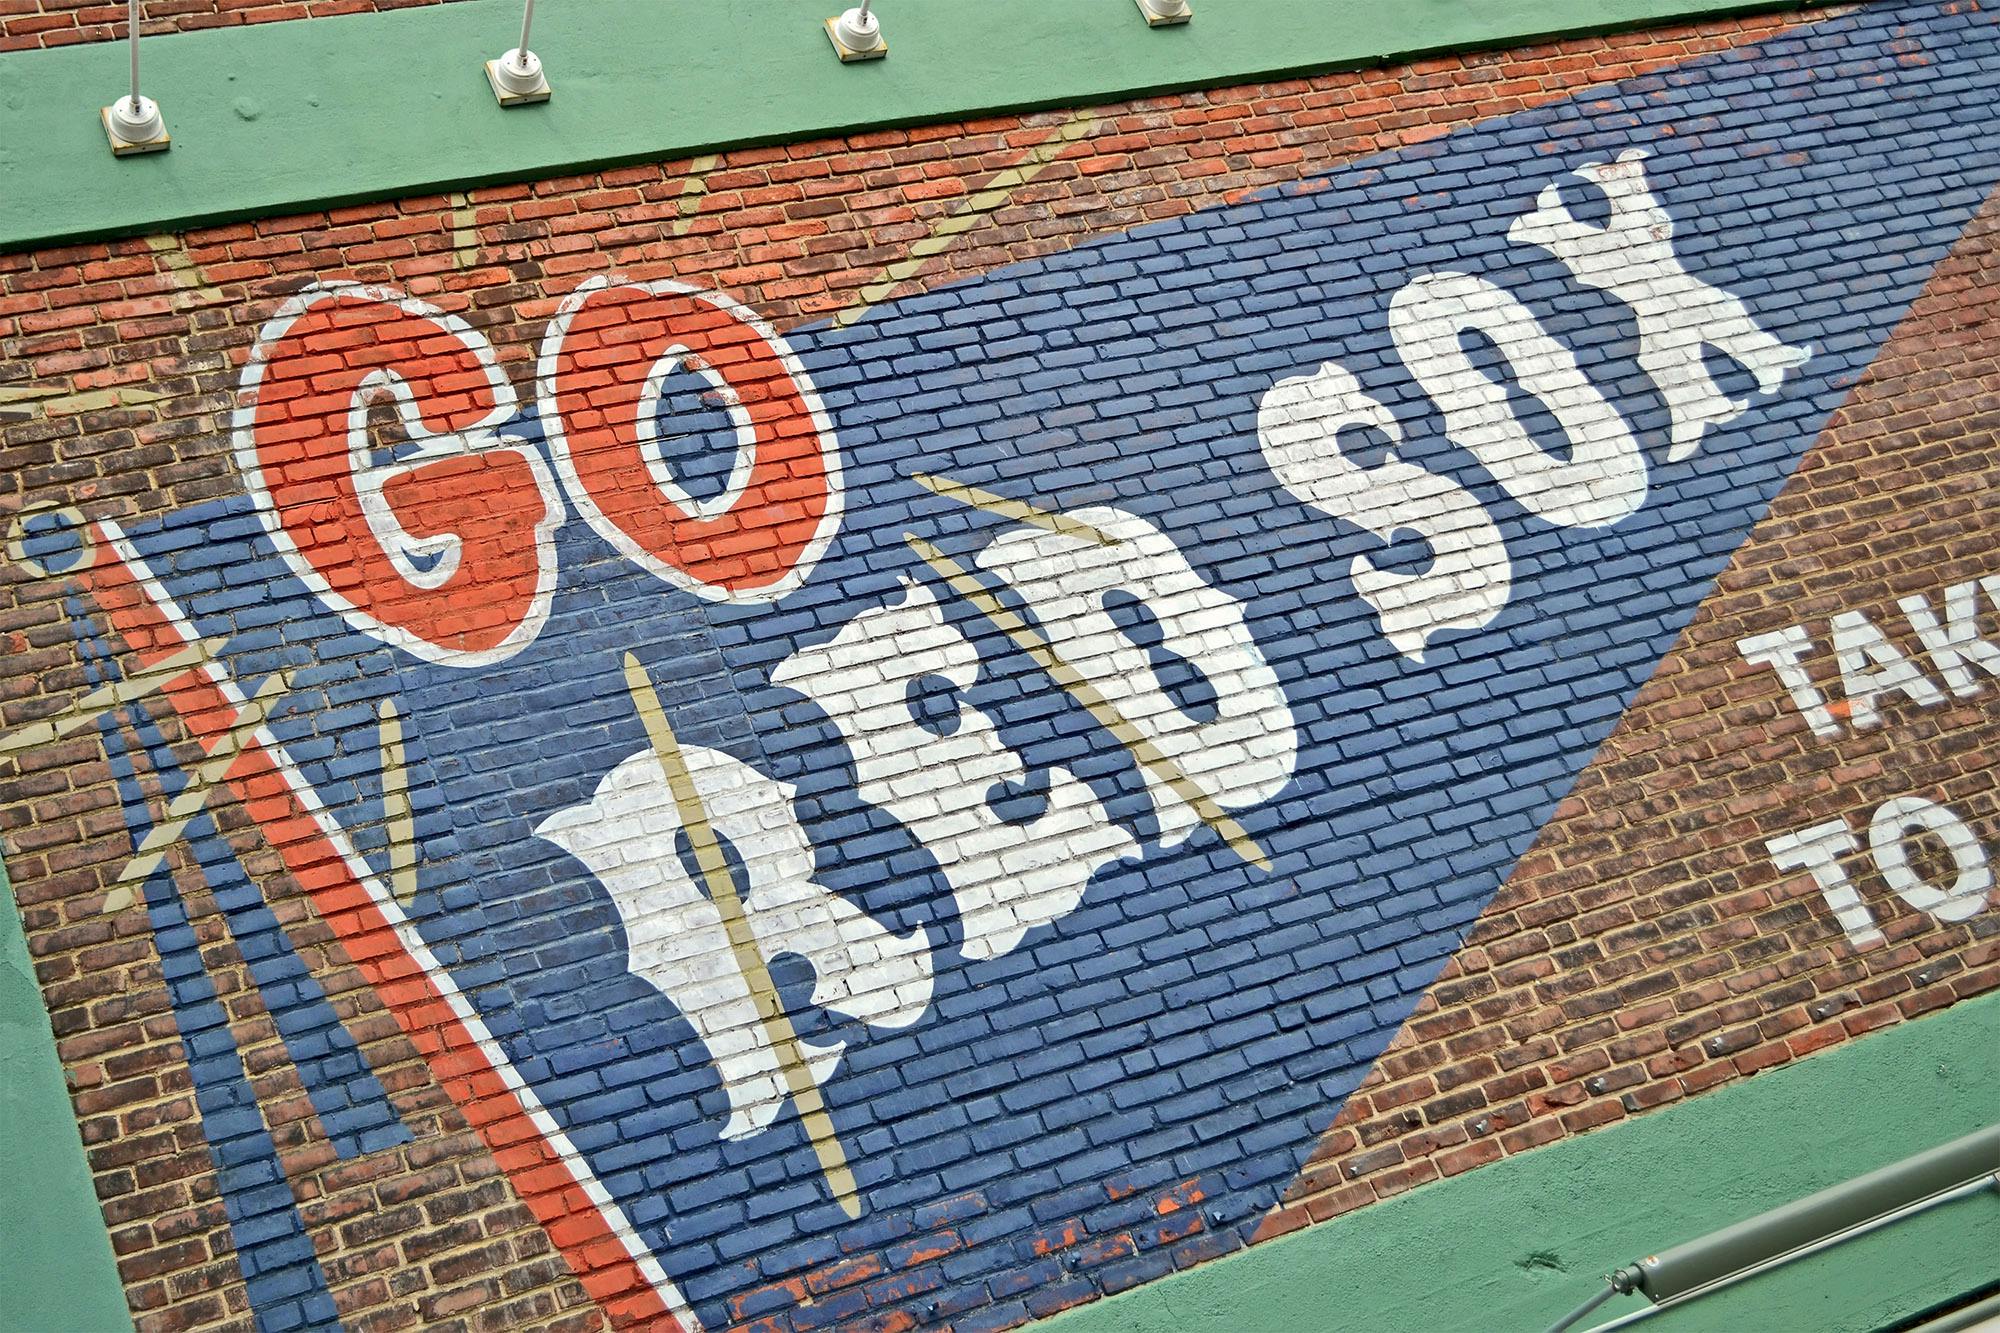 BOSTON - APR 20: Fenway Park on April 20, 2013 in Boston, USA. Fenway Park is the oldest professional sports venue in the United States celebrating its 101th anniversary since its foundation.